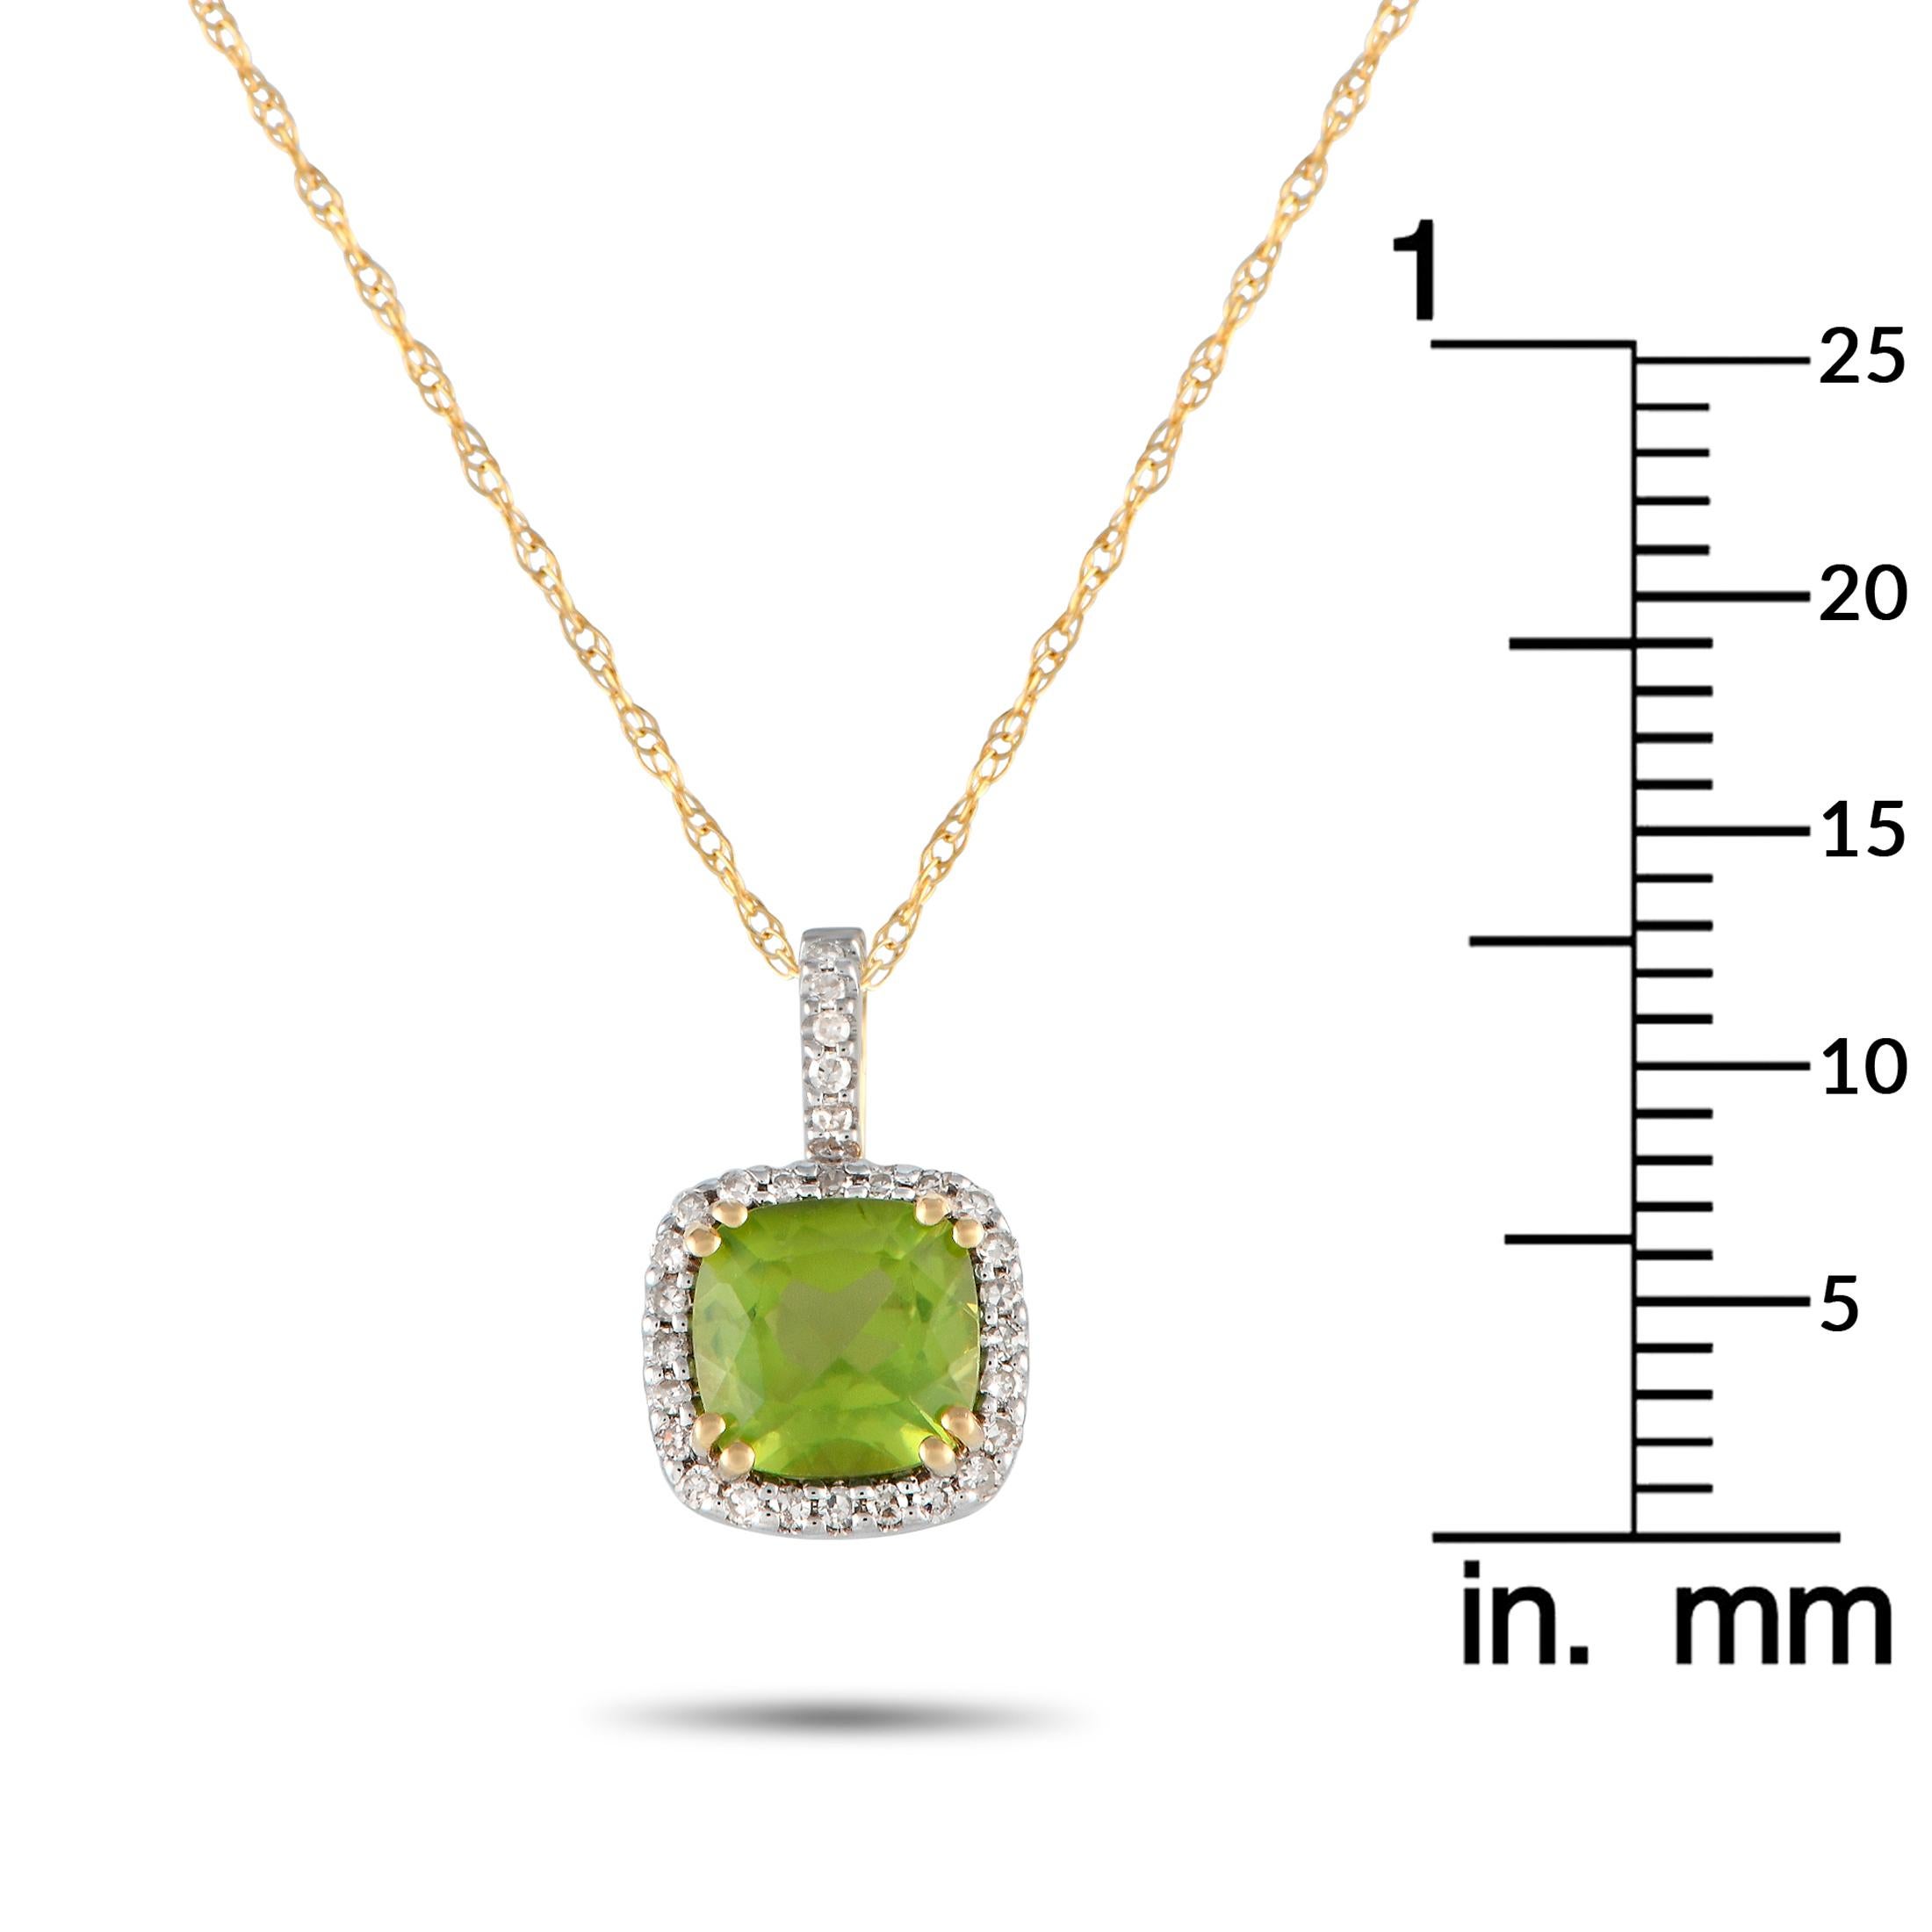 LB Exclusive 14K Yellow Gold 0.09ct Diamond Pendant Necklace PD4-16269YPE In New Condition For Sale In Southampton, PA